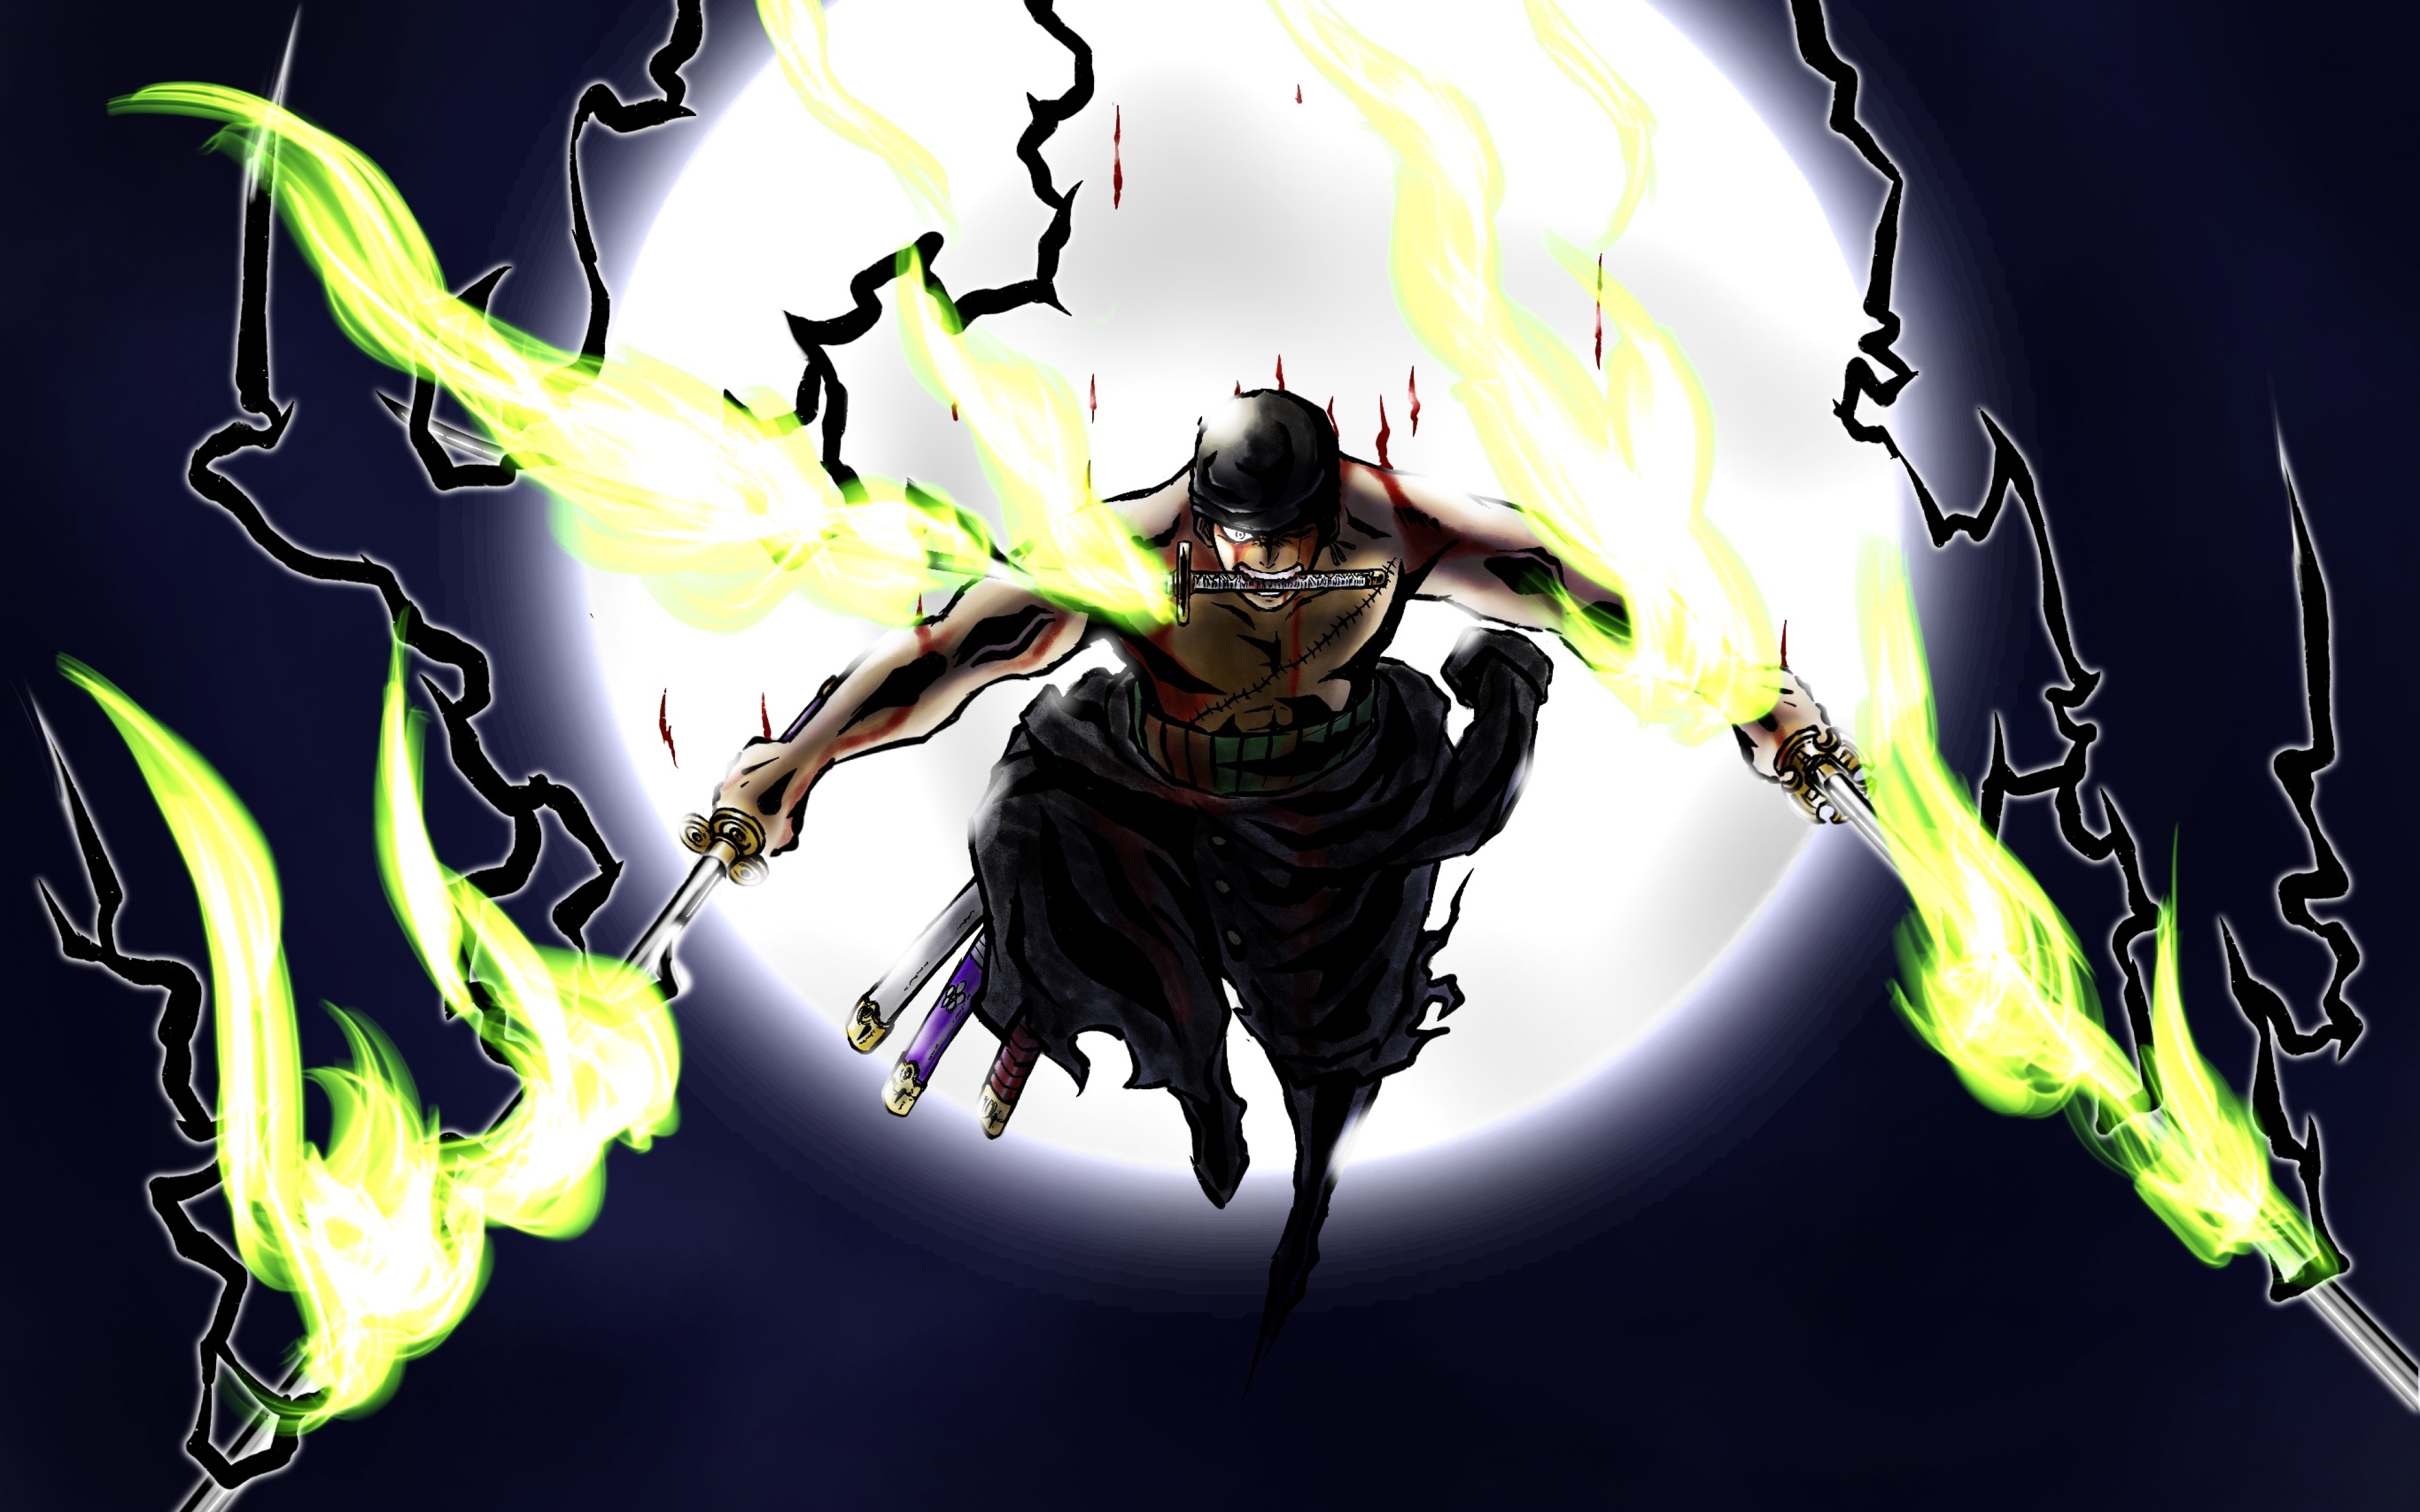 One Piece Zoro HD Manga Art Wallpaper, HD Anime 4K Wallpapers, Images and  Background - Wallpapers Den